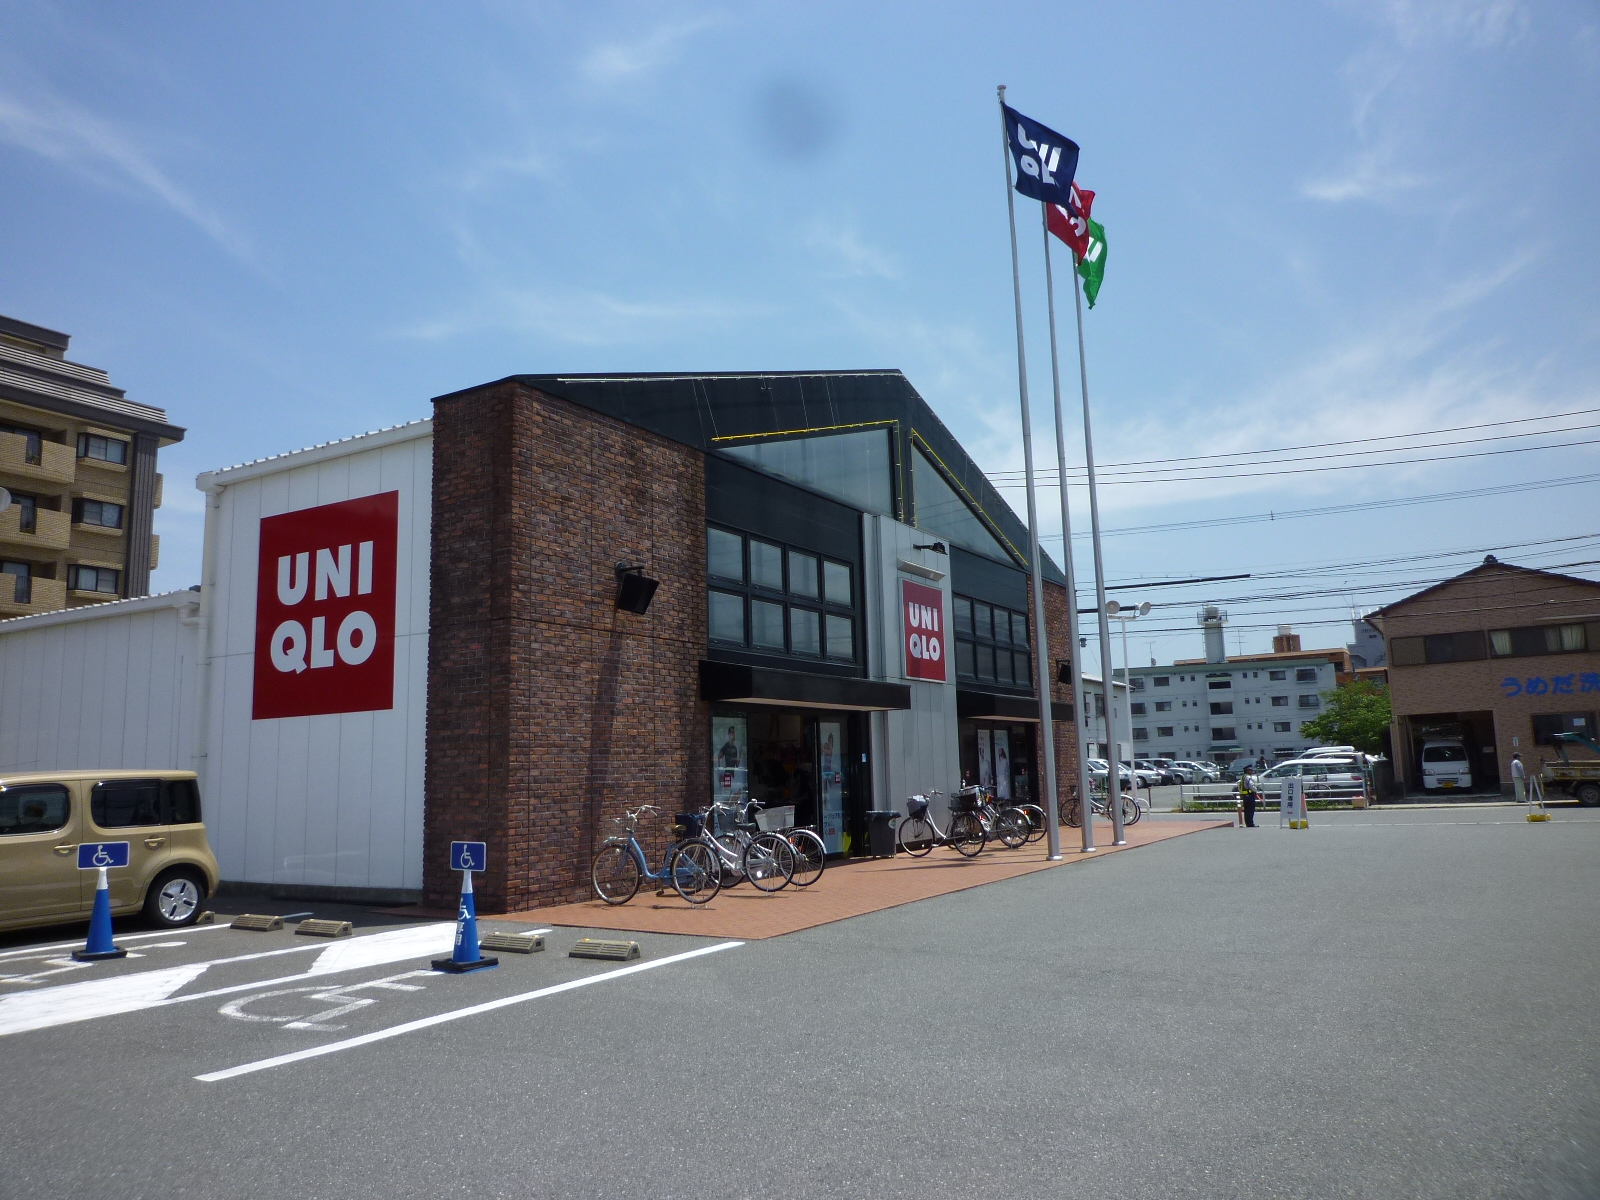 Shopping centre. 472m to UNIQLO Meinohama store (shopping center)